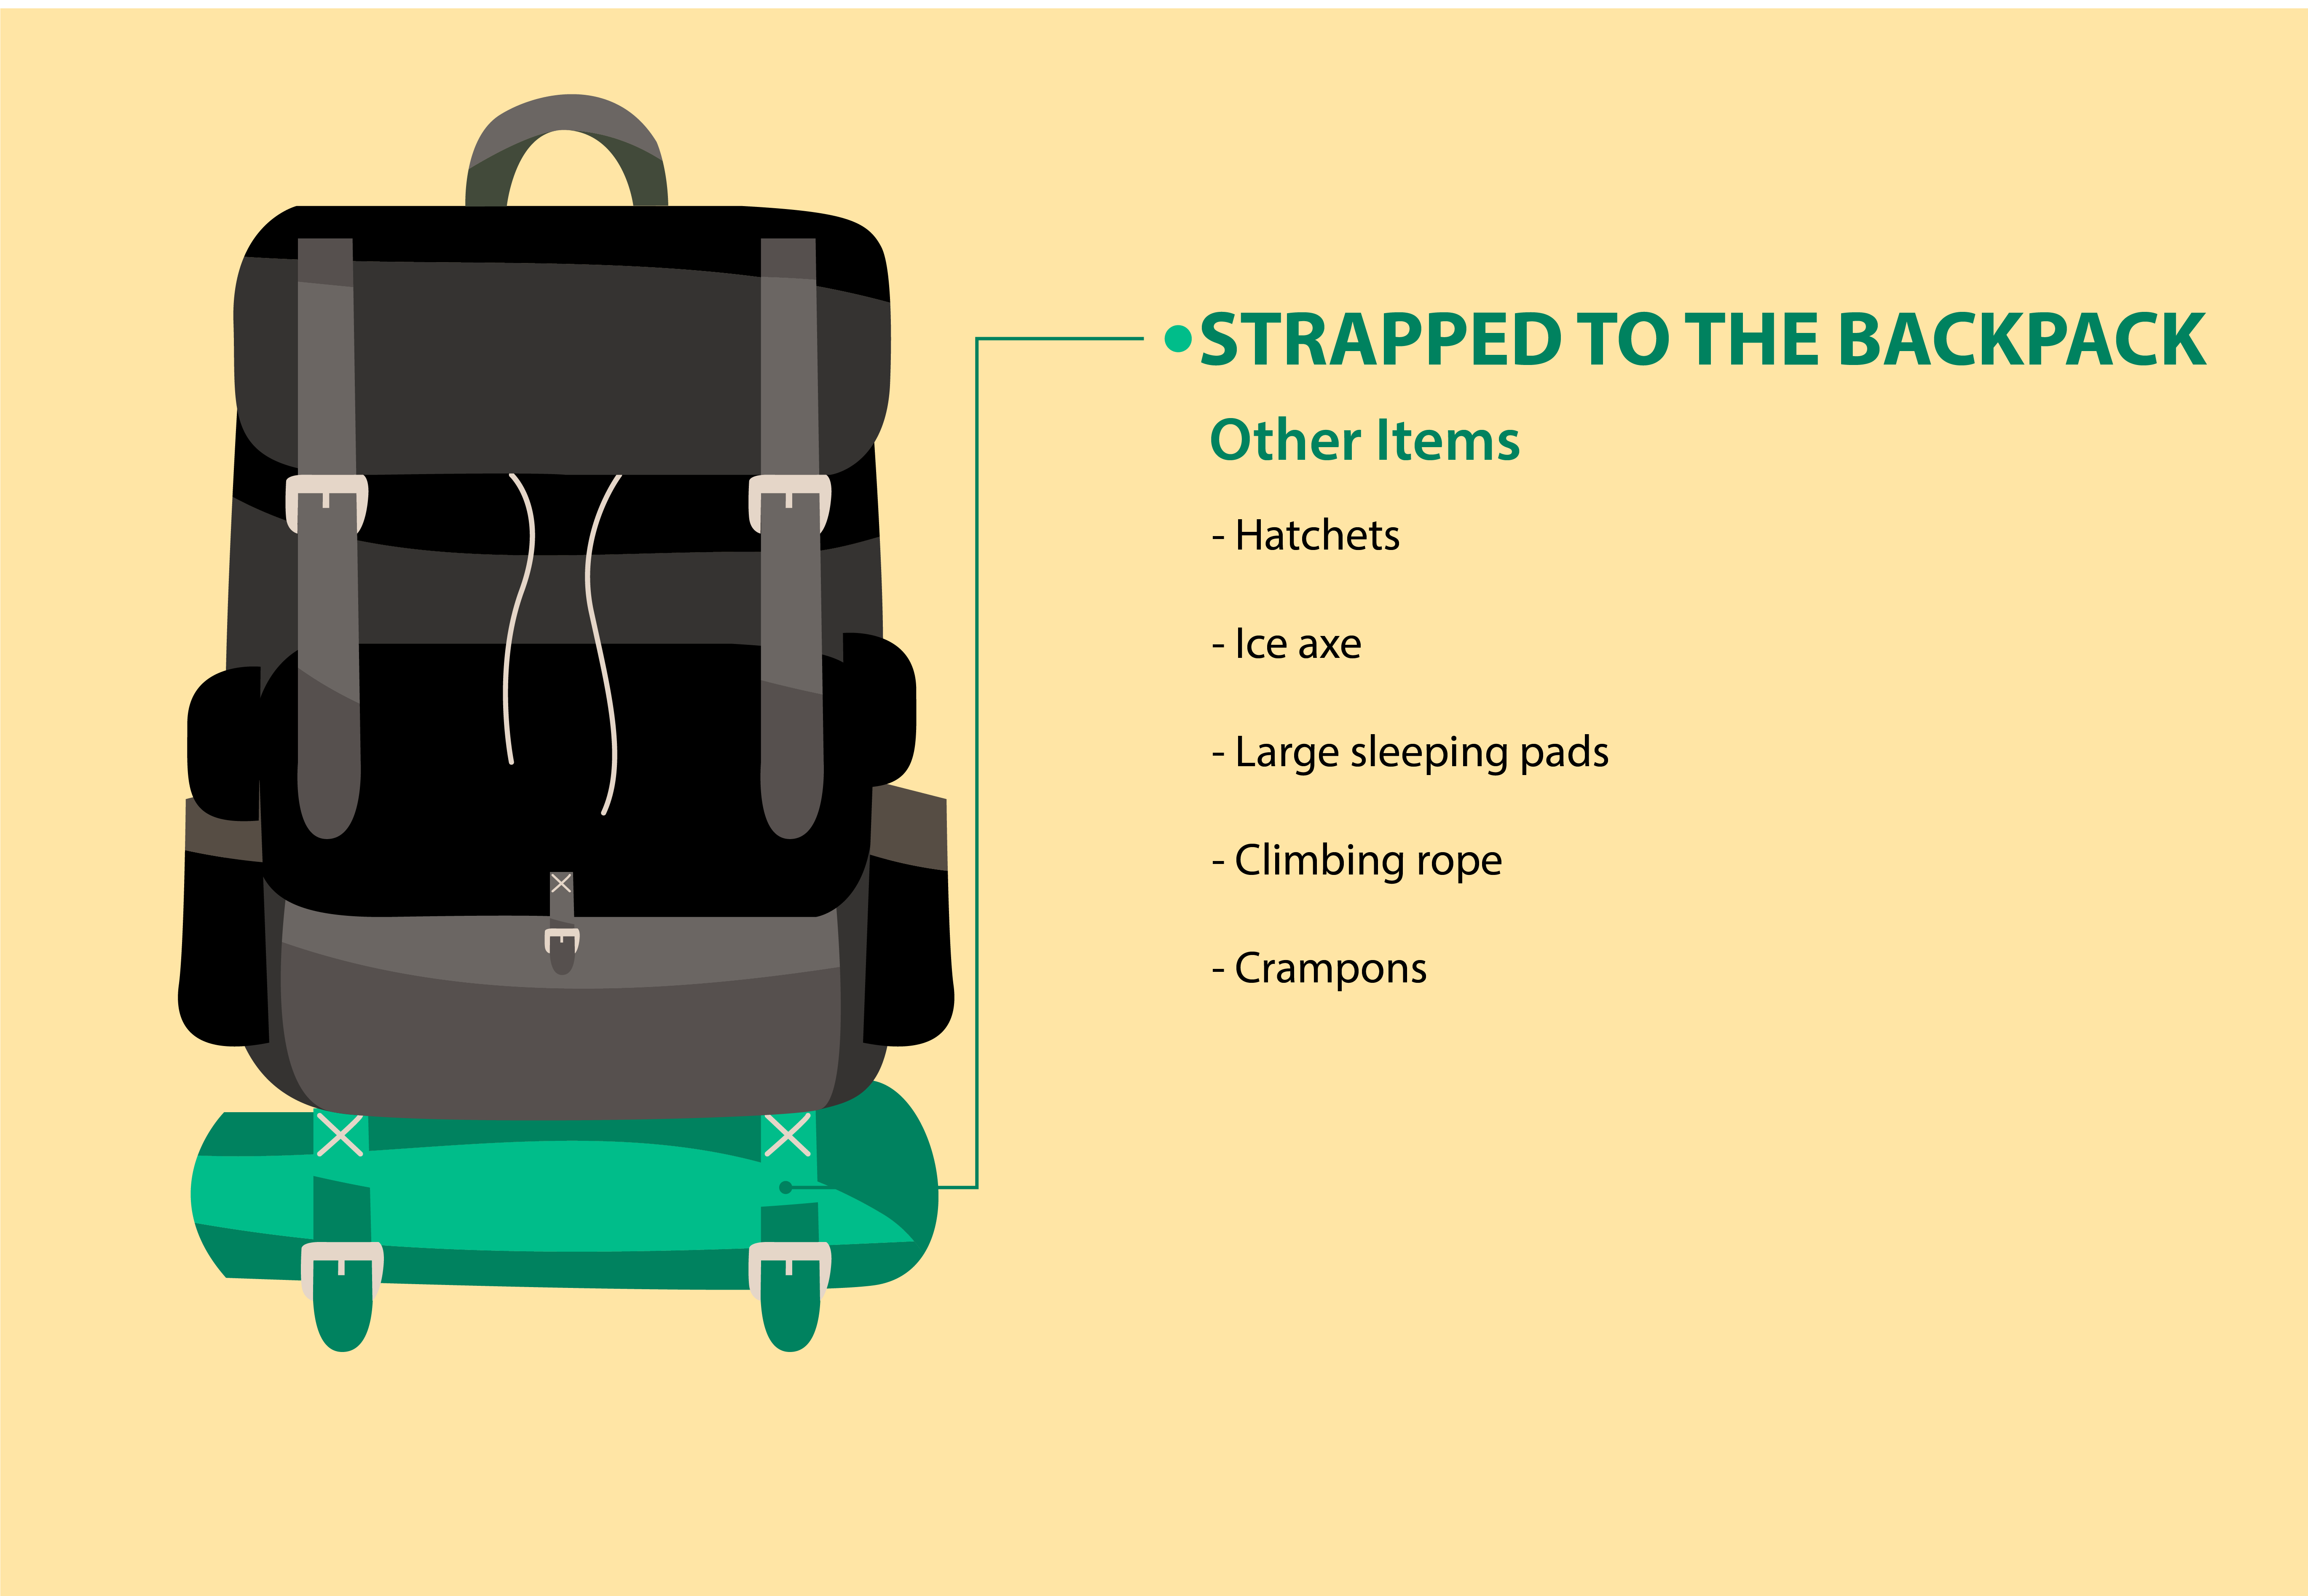 accessory strappings - attach bulky but lightweight items